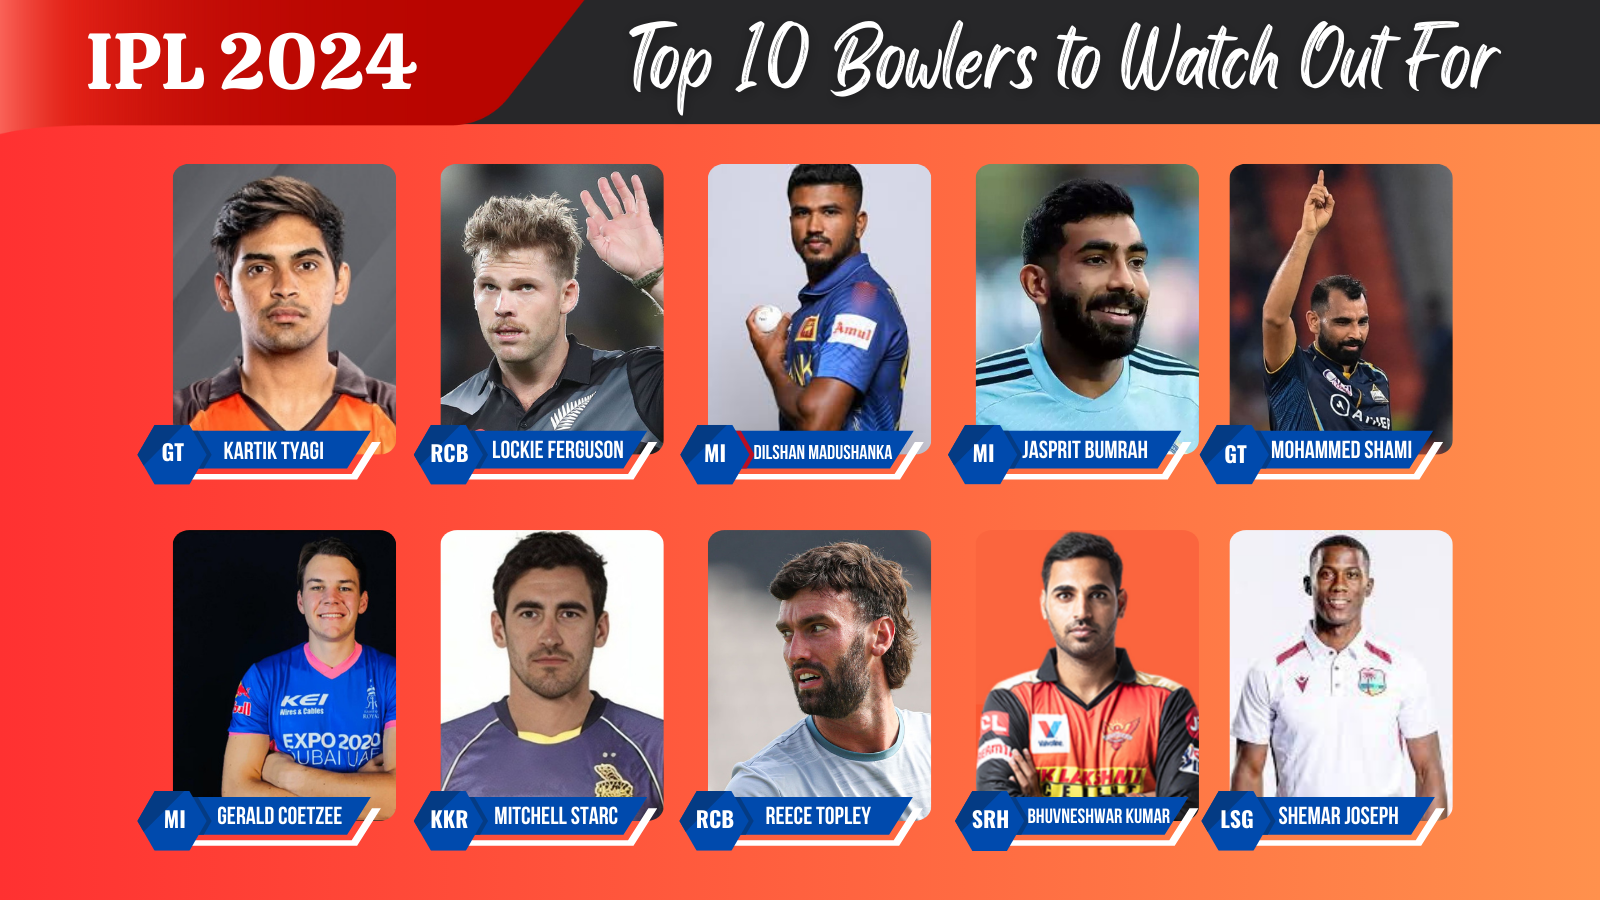 Top 10 Bowlers to Watch Out For